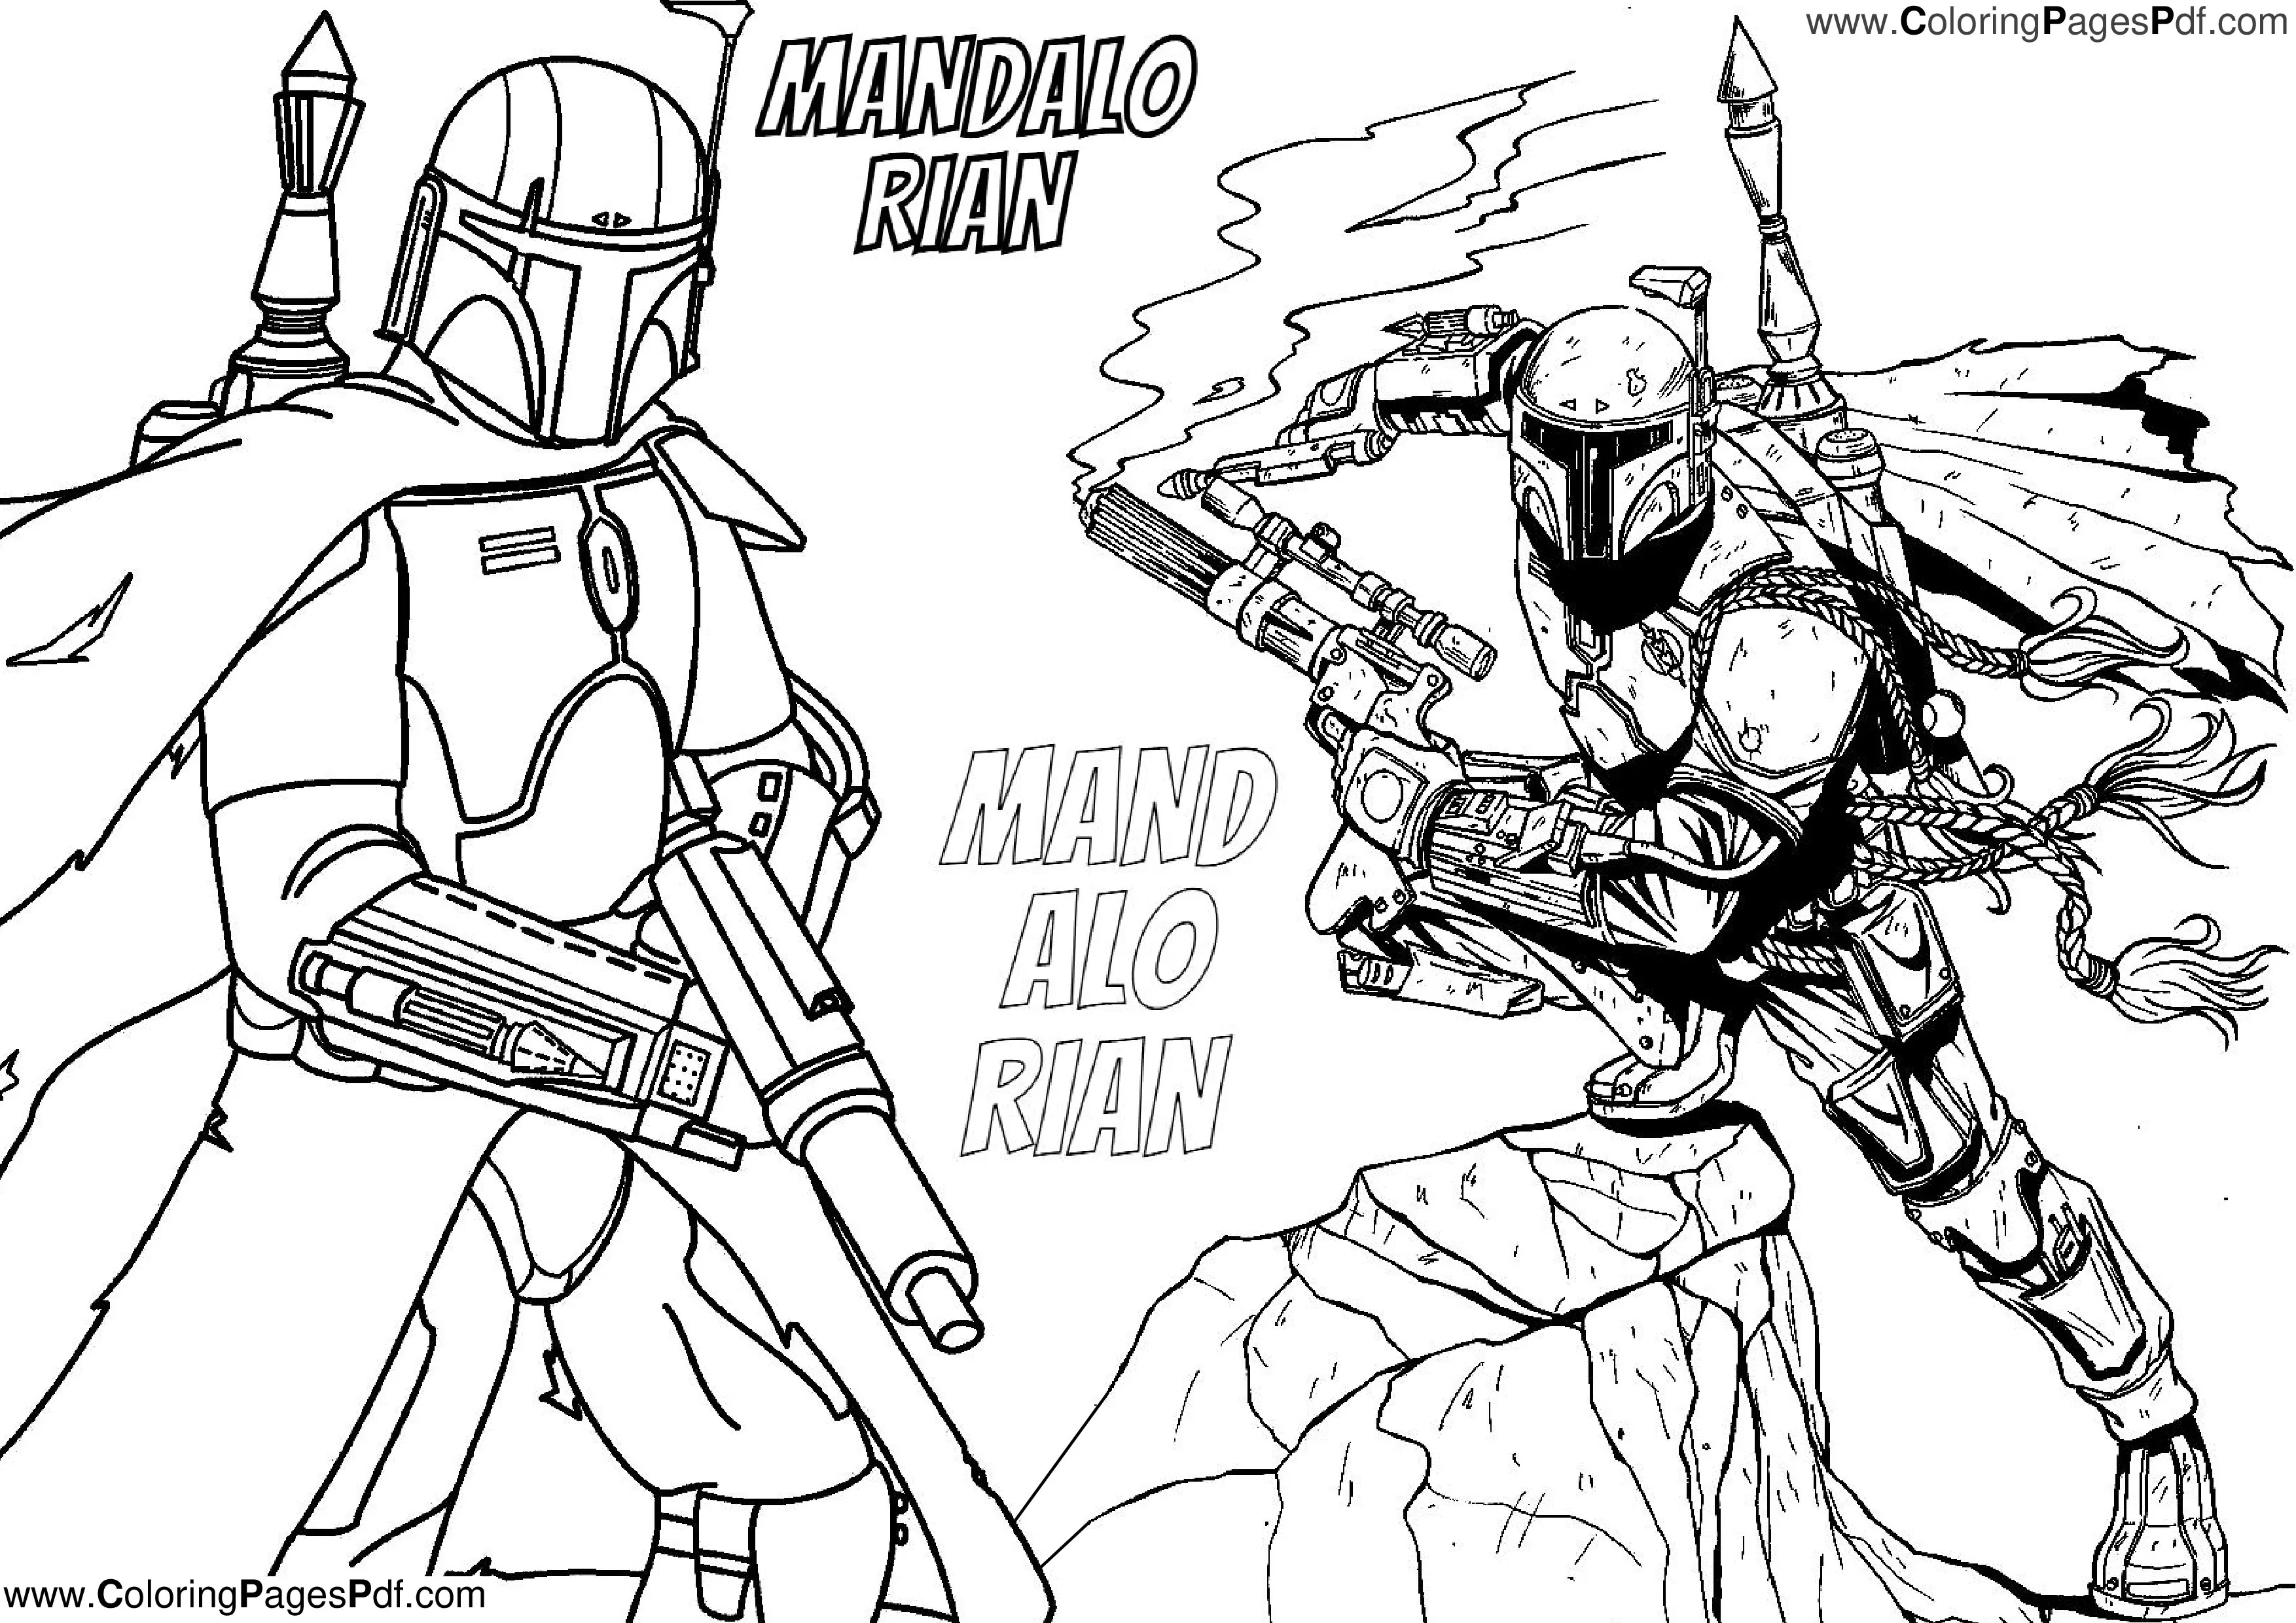 Free mandalorian coloring pages